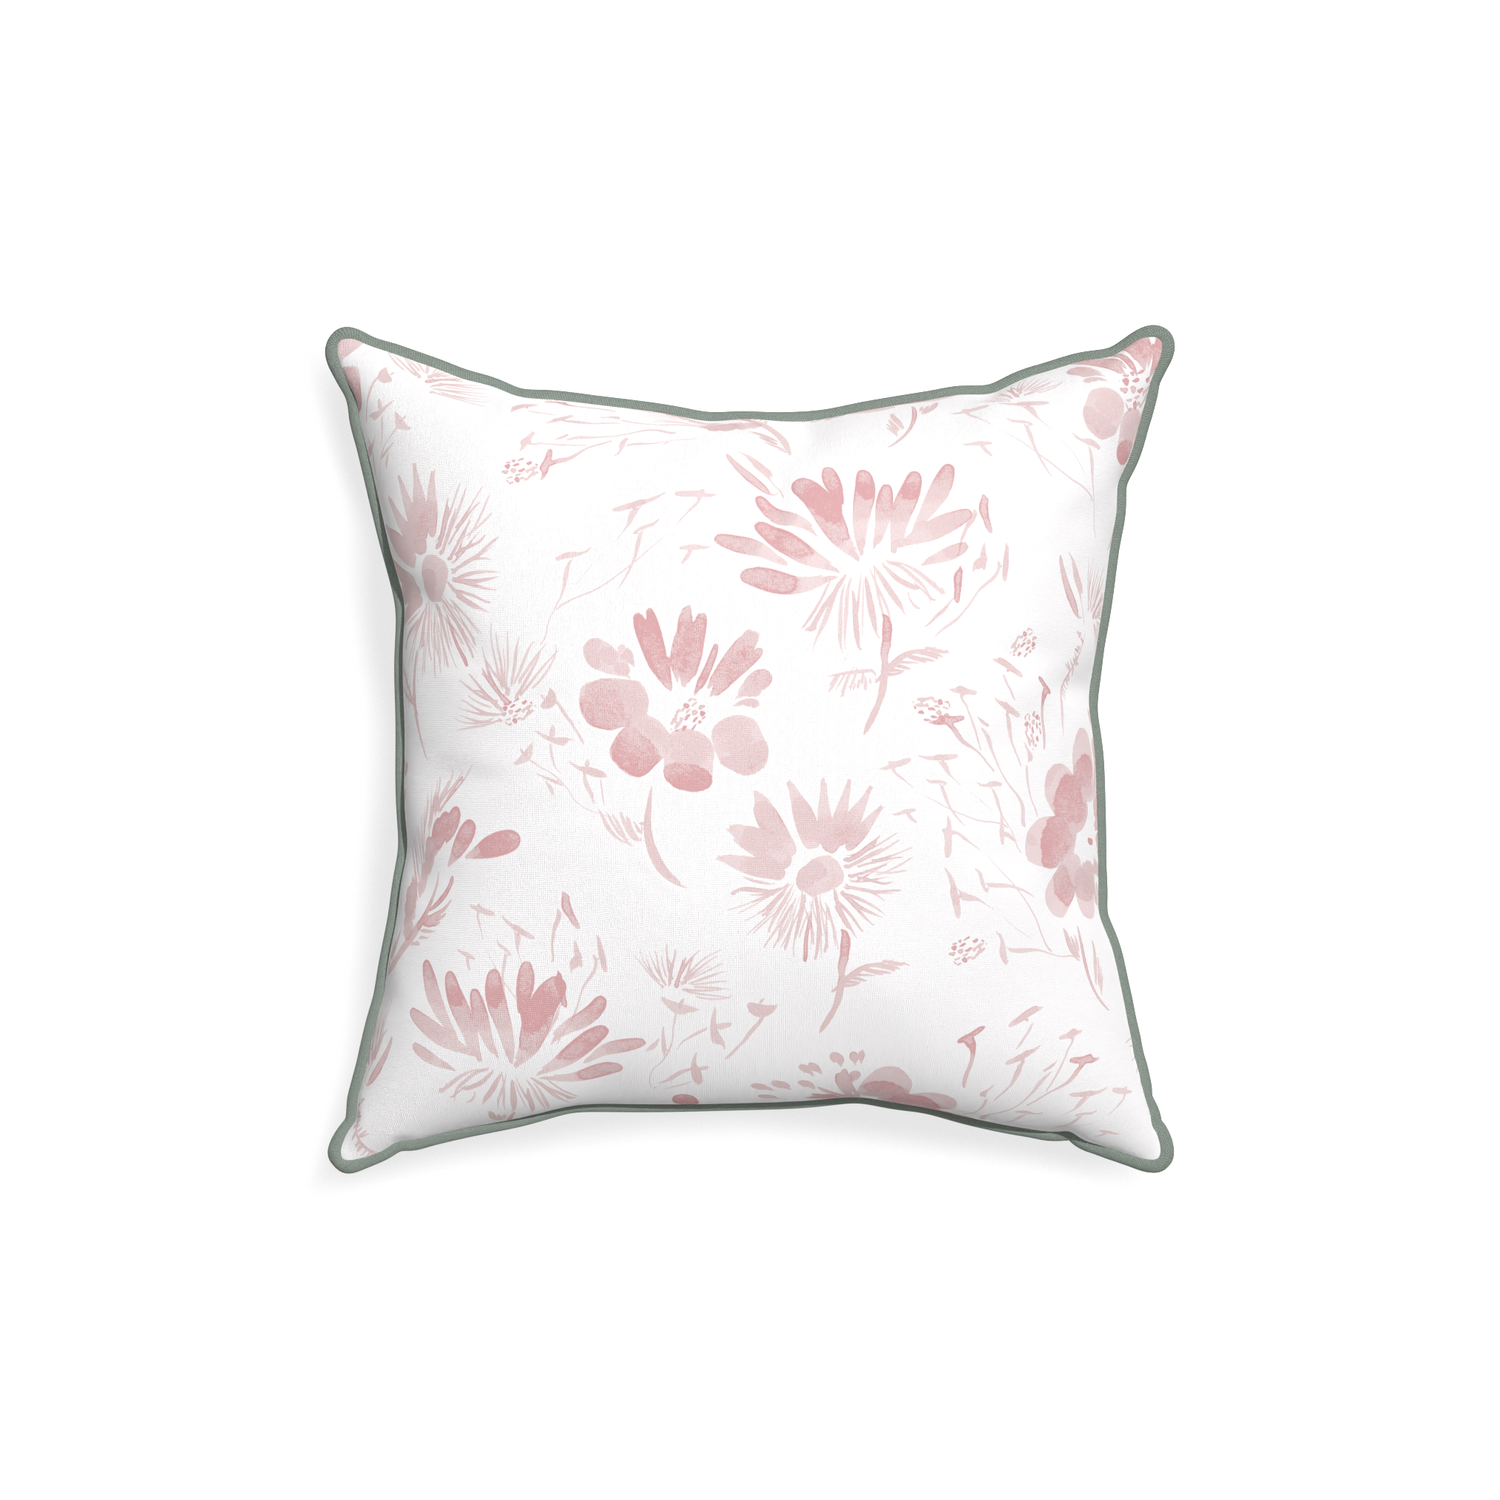 18-square blake custom pink floralpillow with sage piping on white background